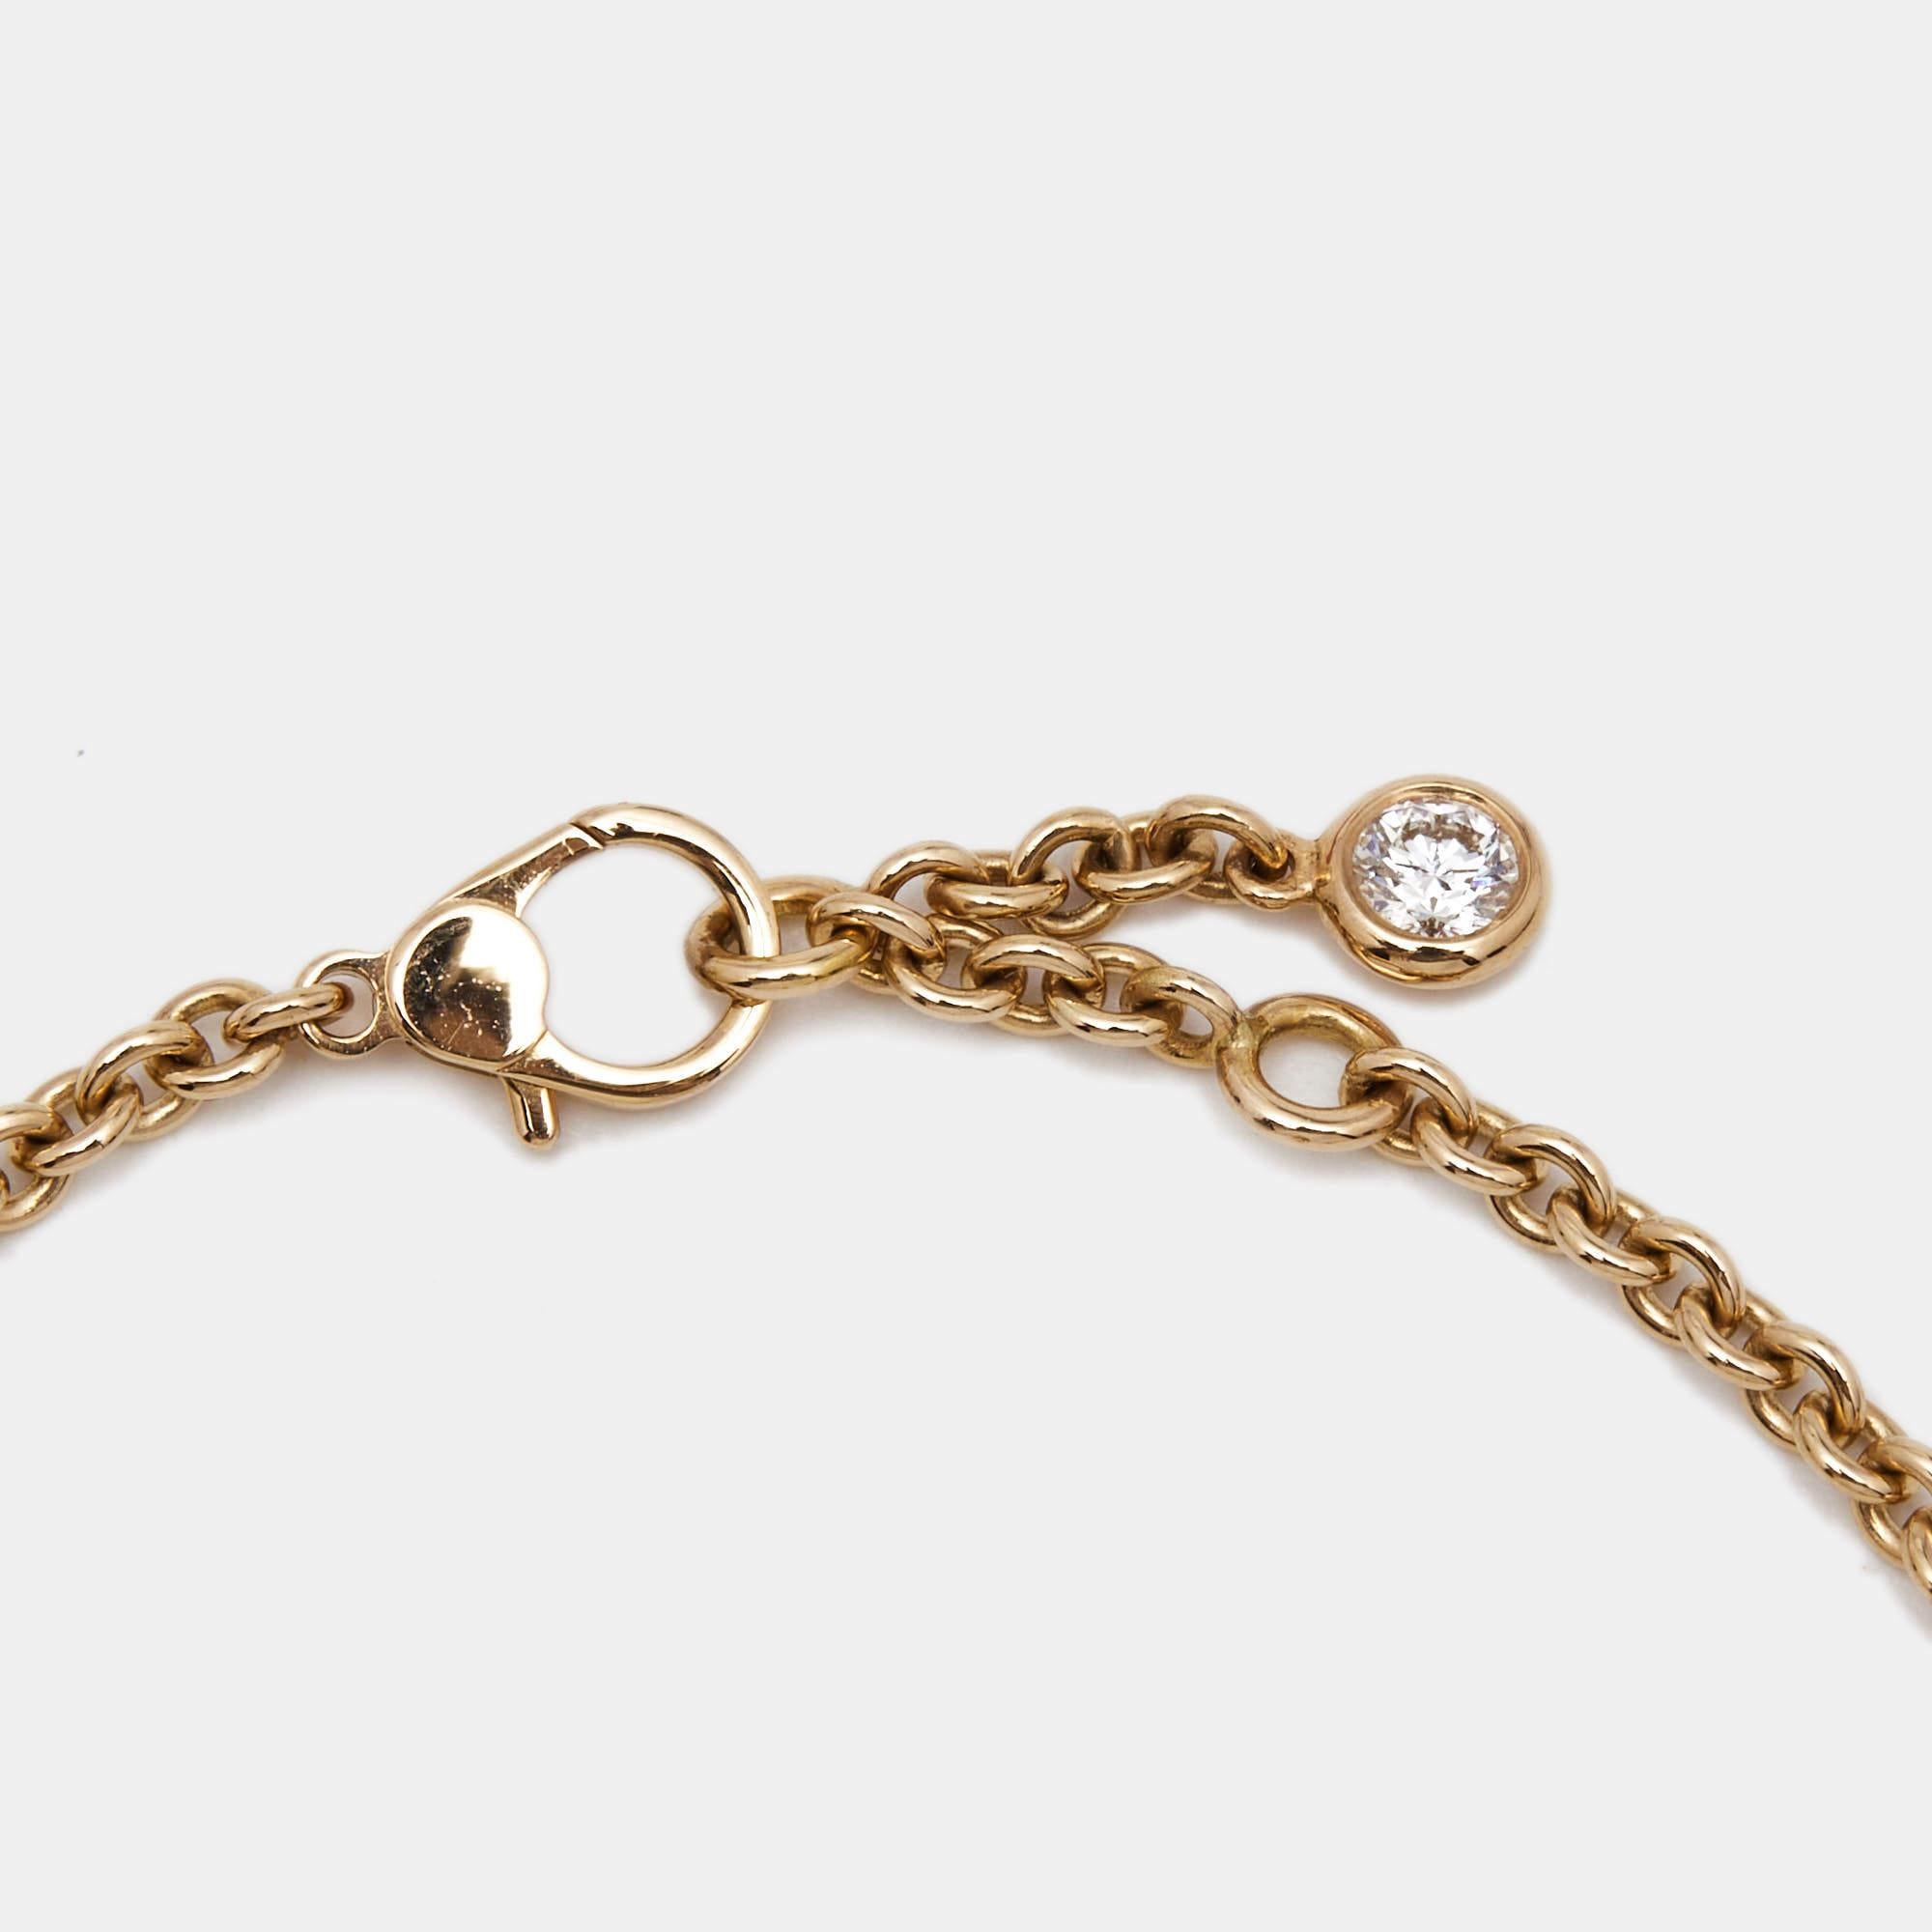 The Hermès bracelet is a luxurious jewelry piece featuring a delicate chain crafted from exquisite 18k rose gold. It is adorned with brilliant-cut diamonds, creating a stunning and timeless design that exudes elegance and sophistication.

